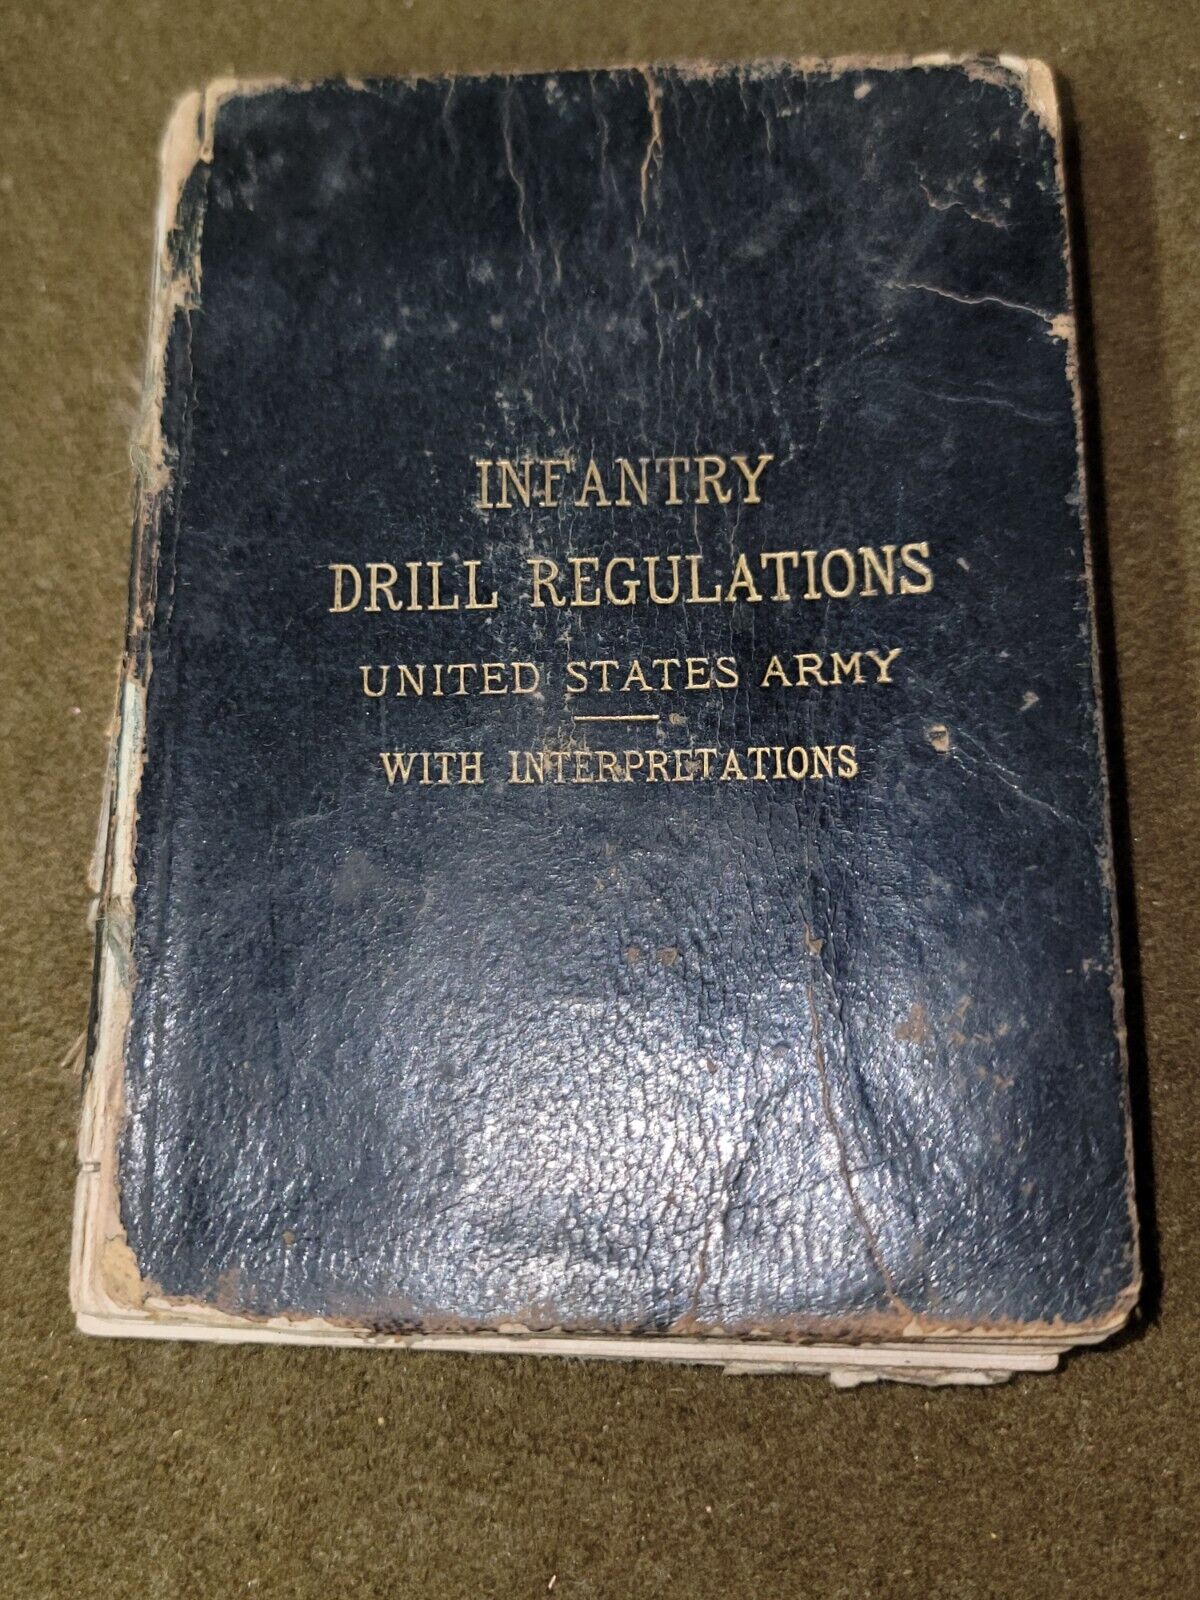 US Army Infantry Drill Regulations Dated 1891